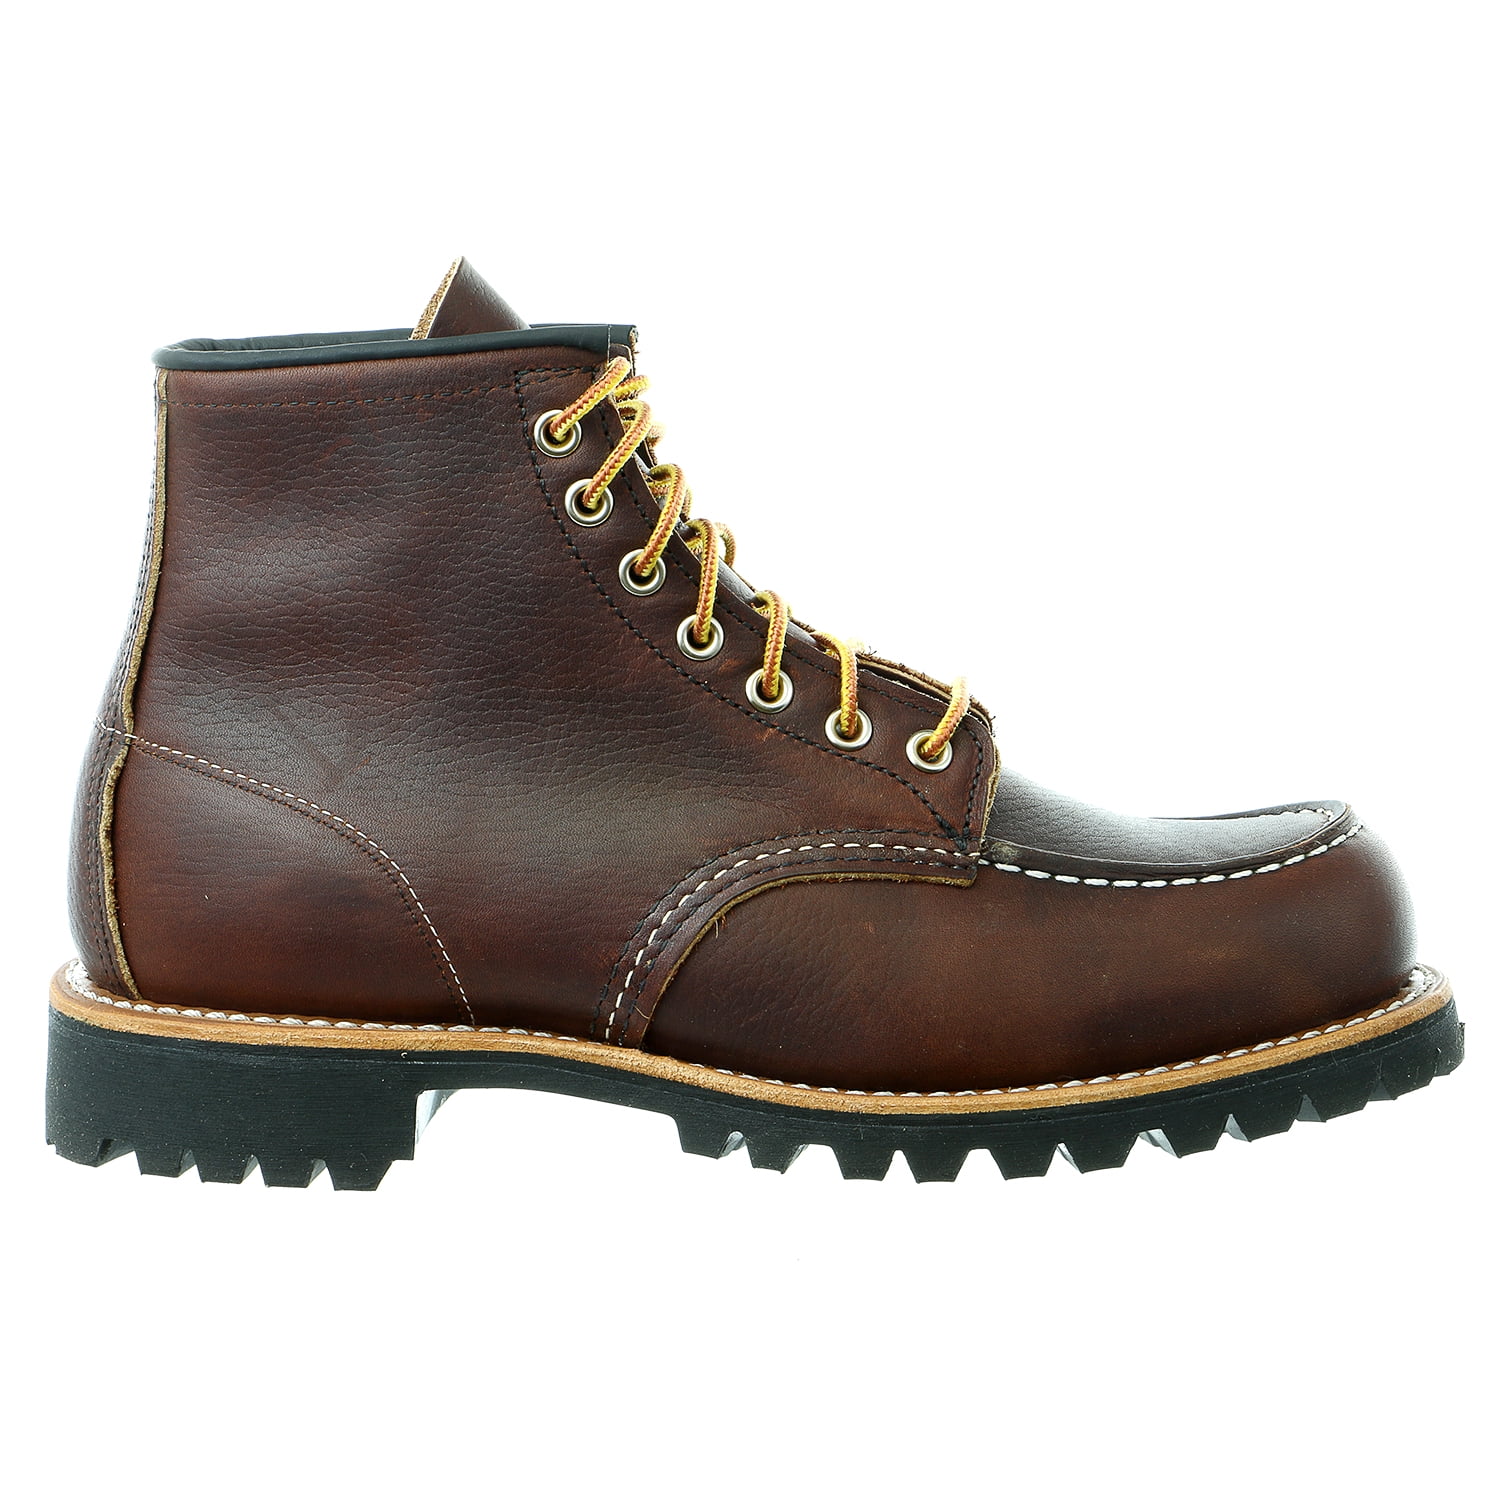 Red Wing Heritage 8146 6